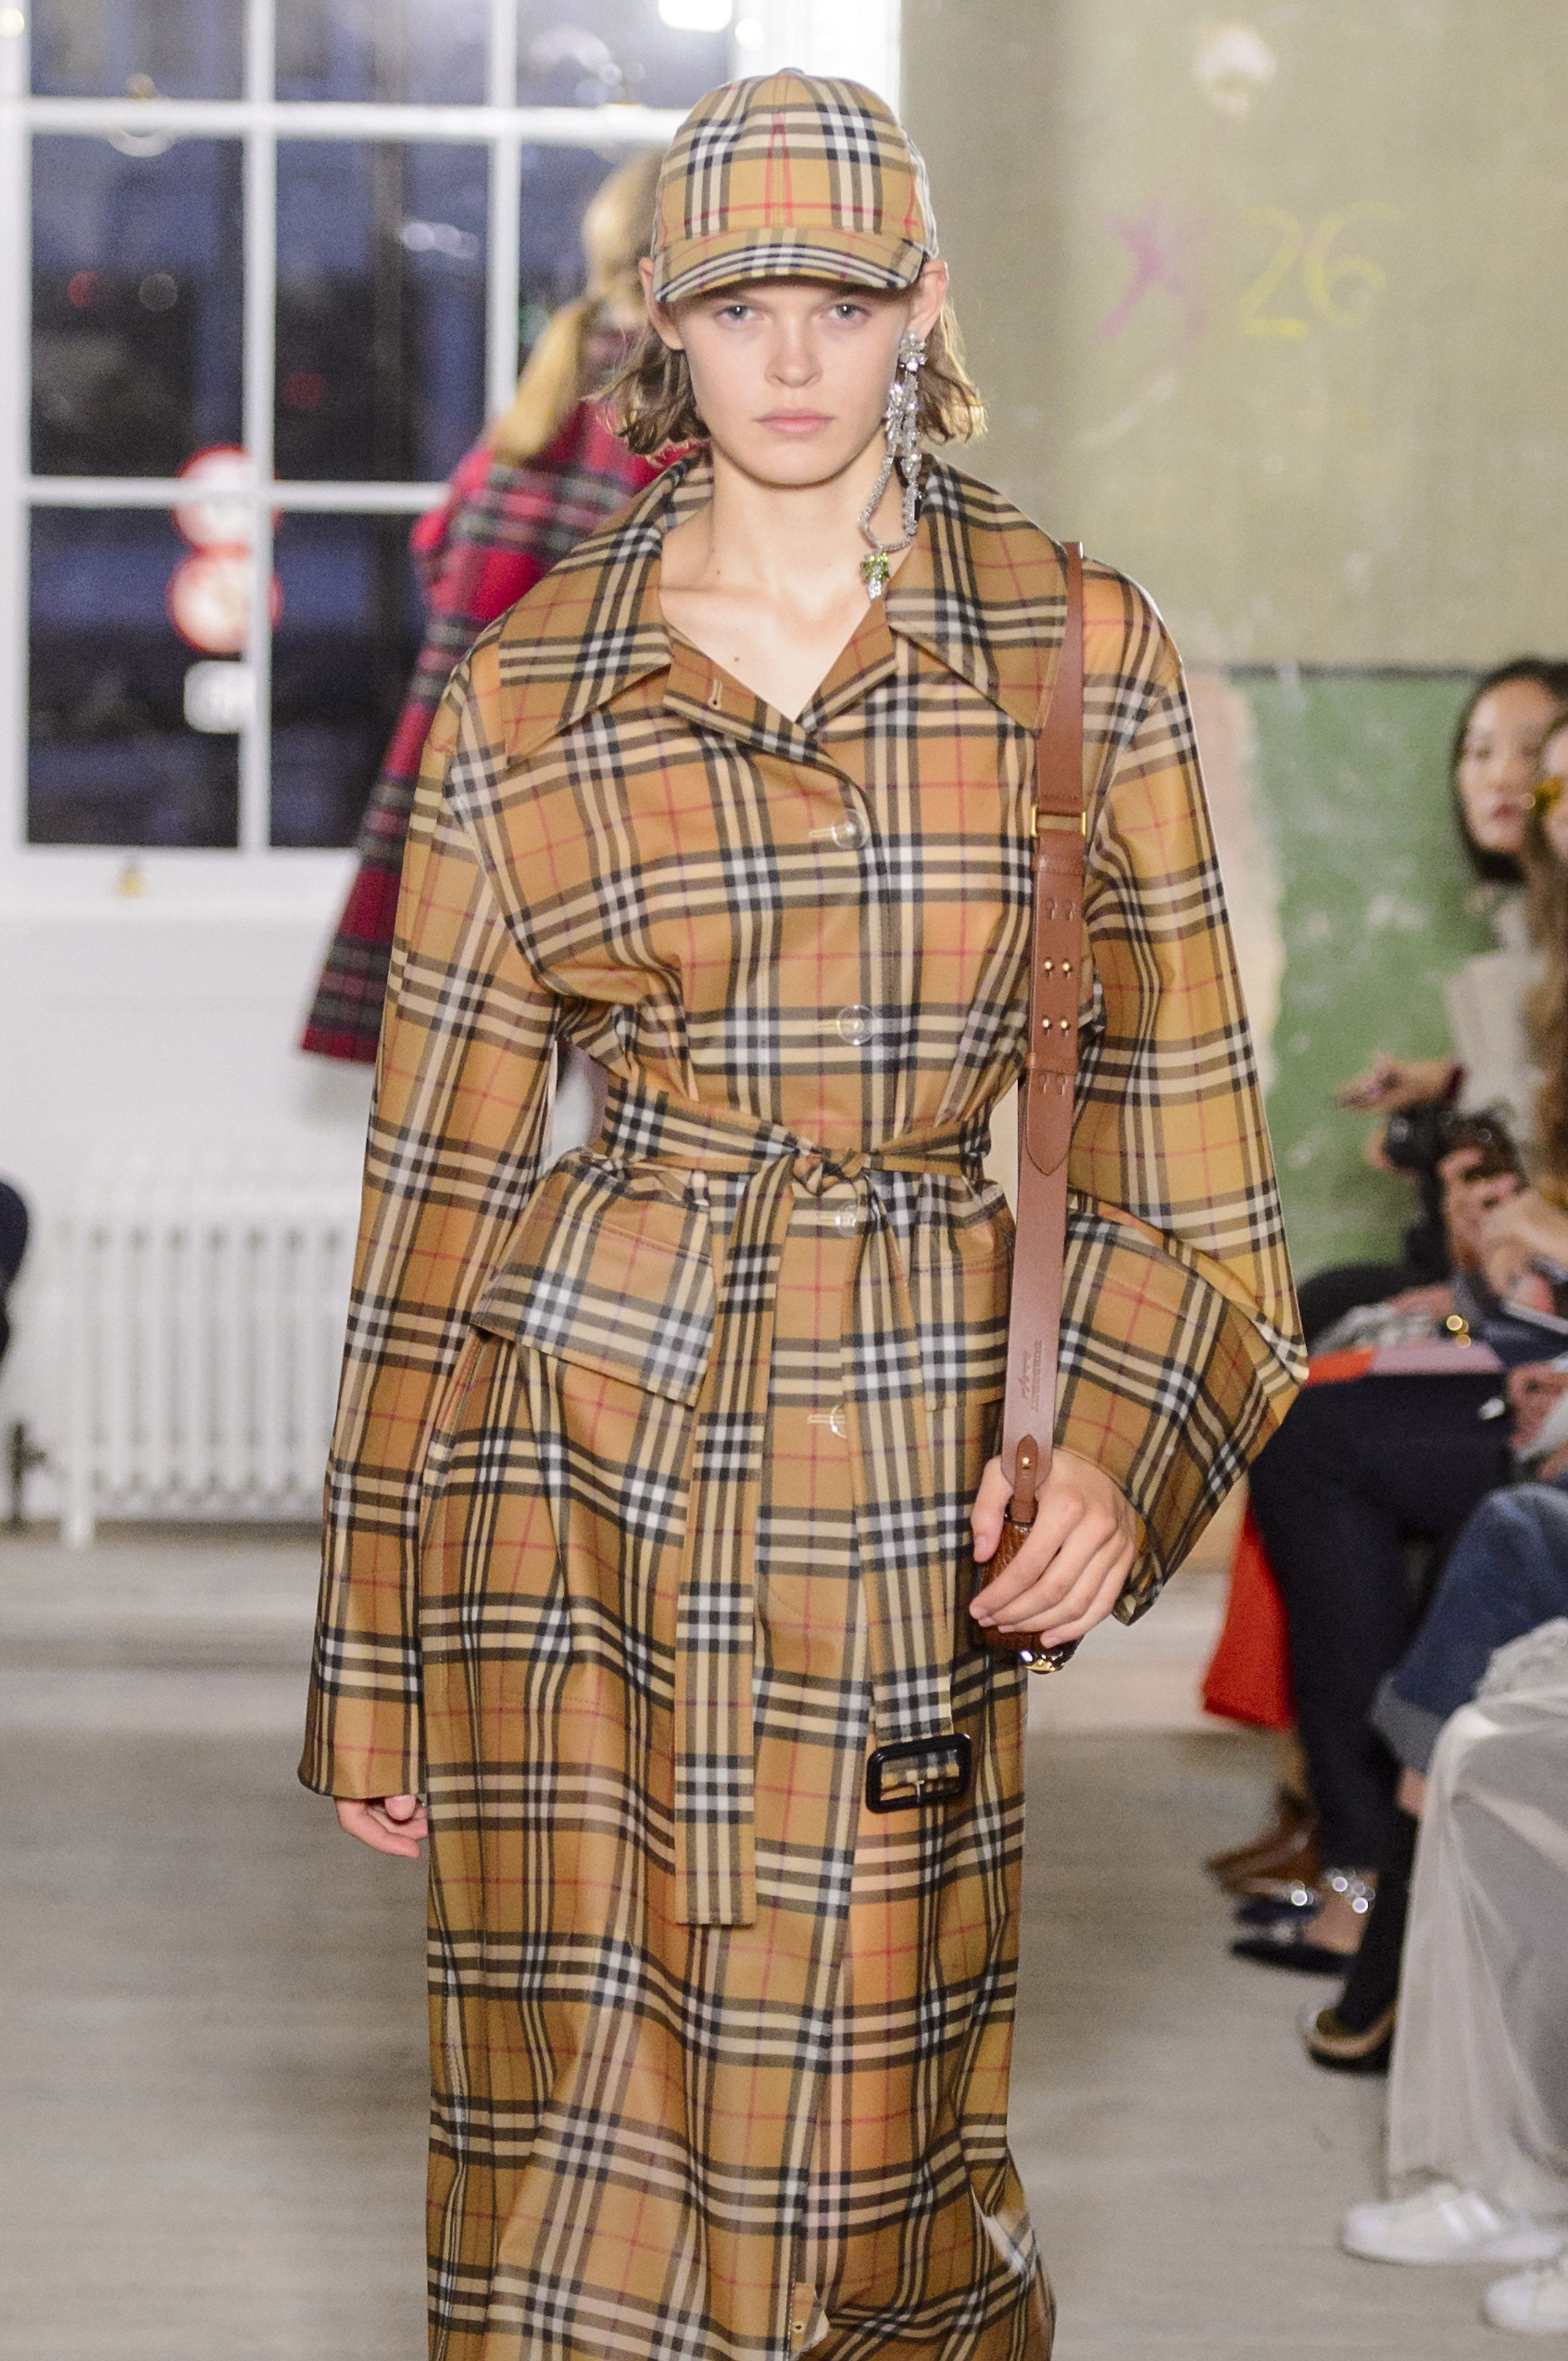 Christopher Bailey's Collection Burberry Will Be To LGBTQ